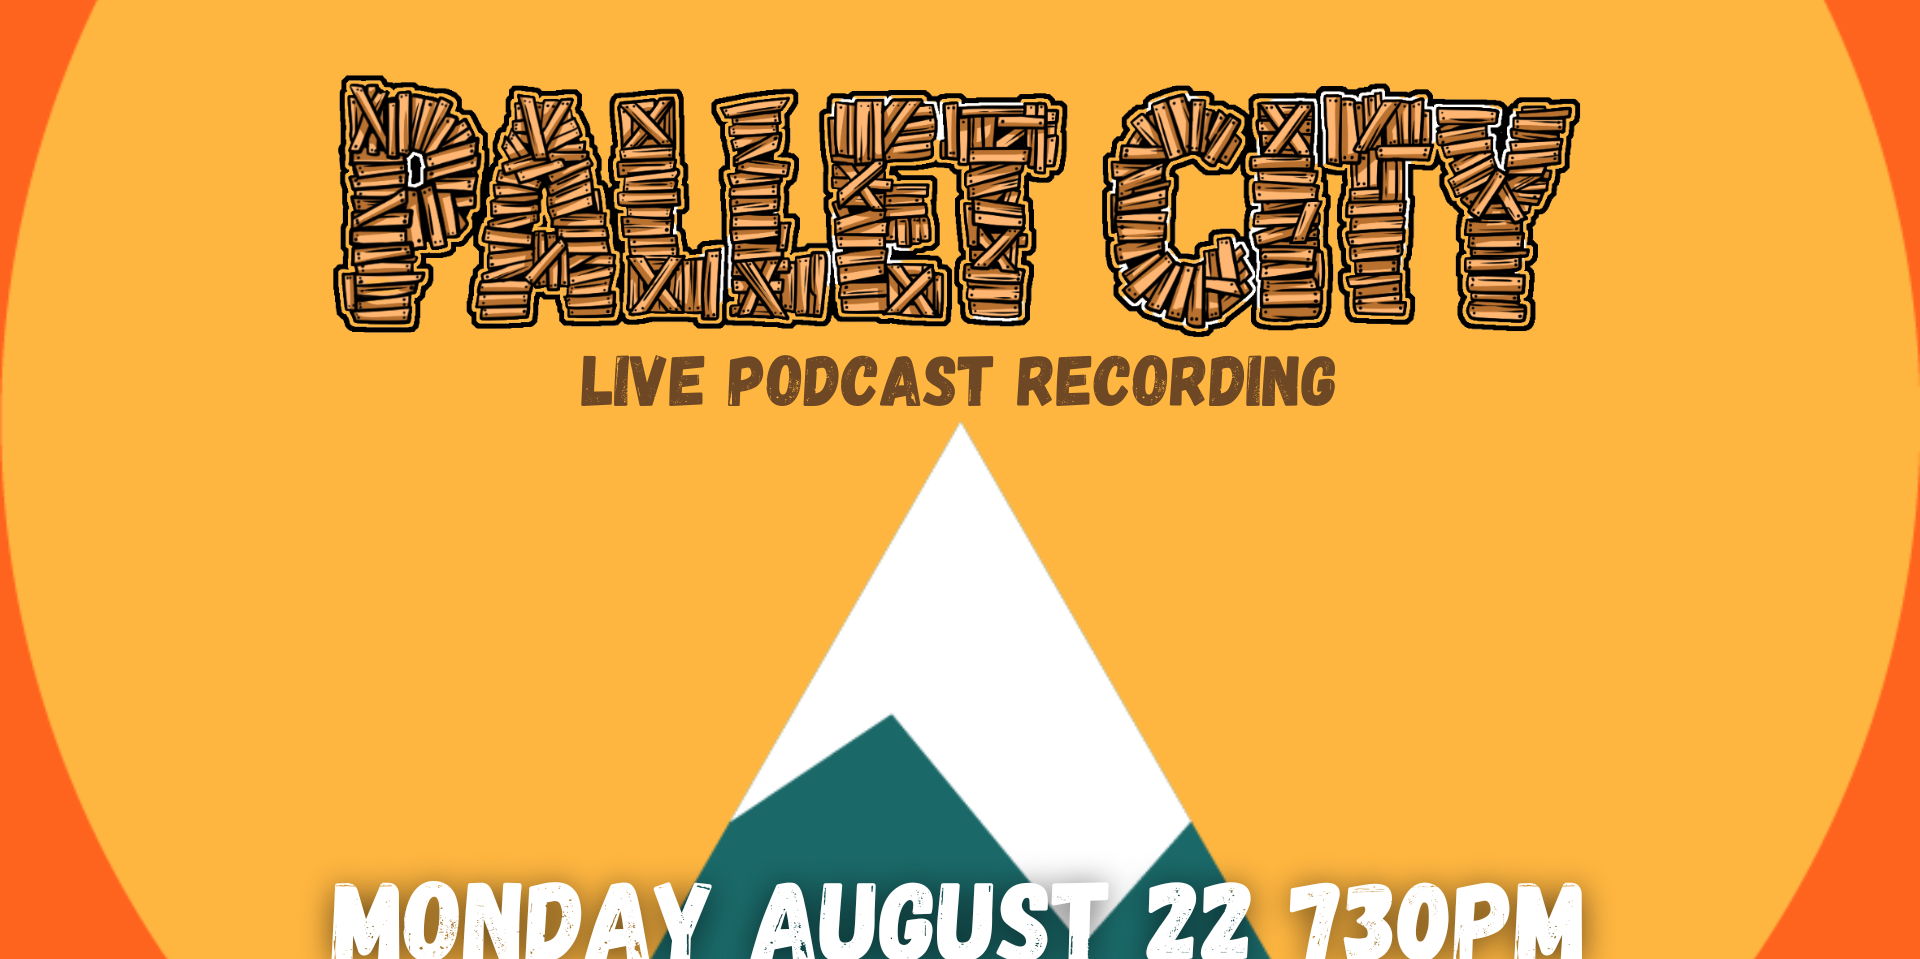 Pallet City Live Podcast Recording at Western Sky Bar & Taproom promotional image